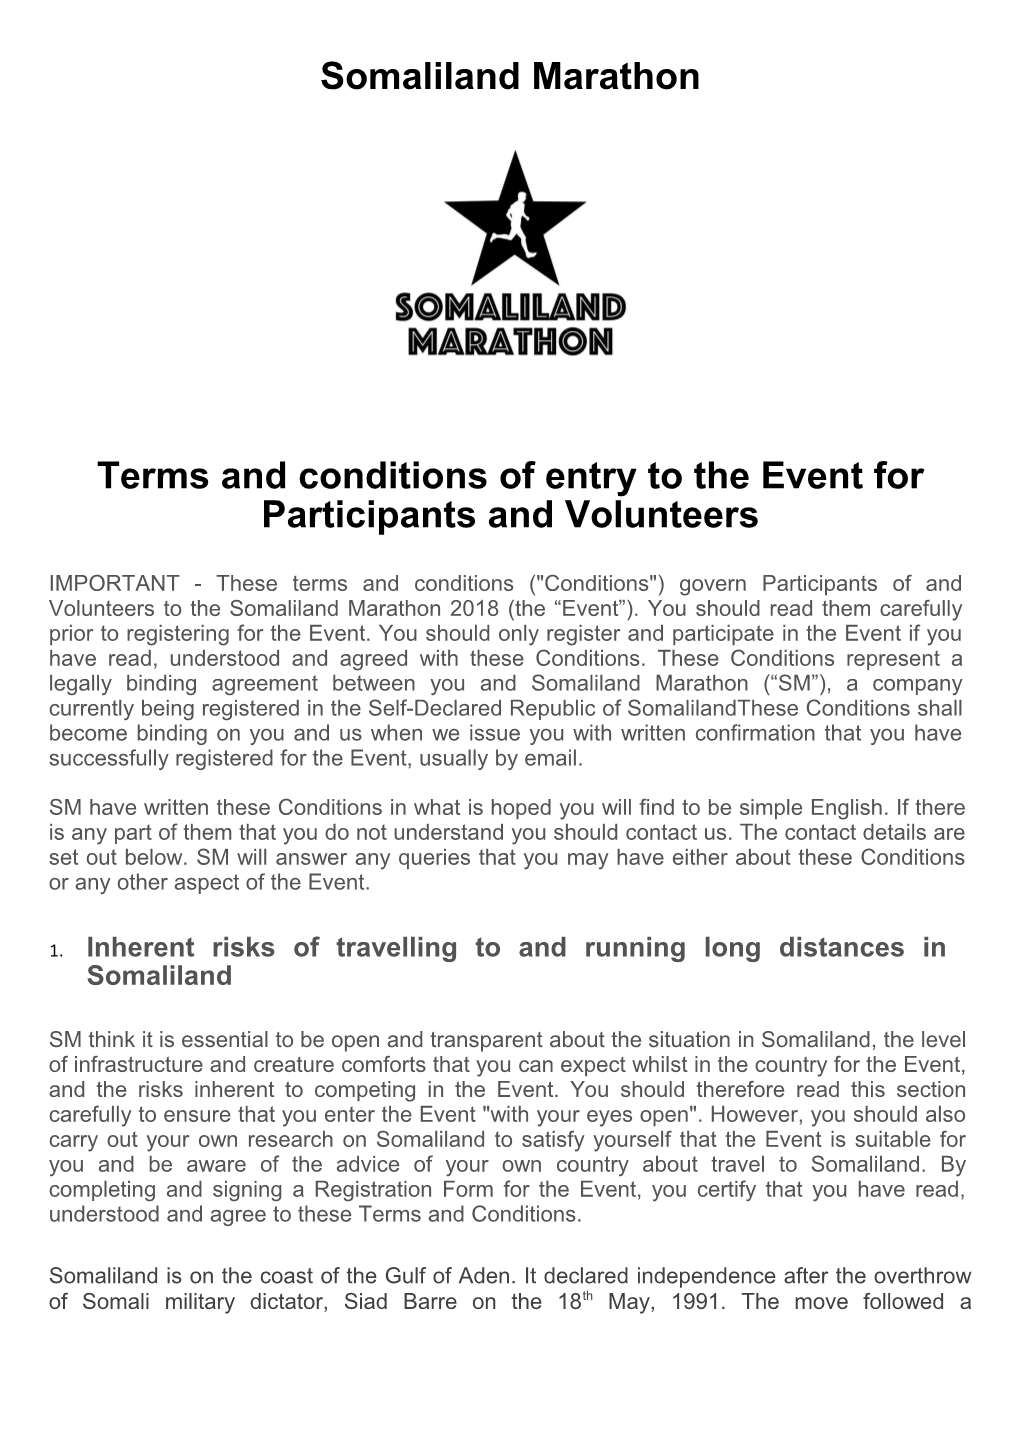 Terms and Conditions of Entry to the Event for Participants and Volunteers